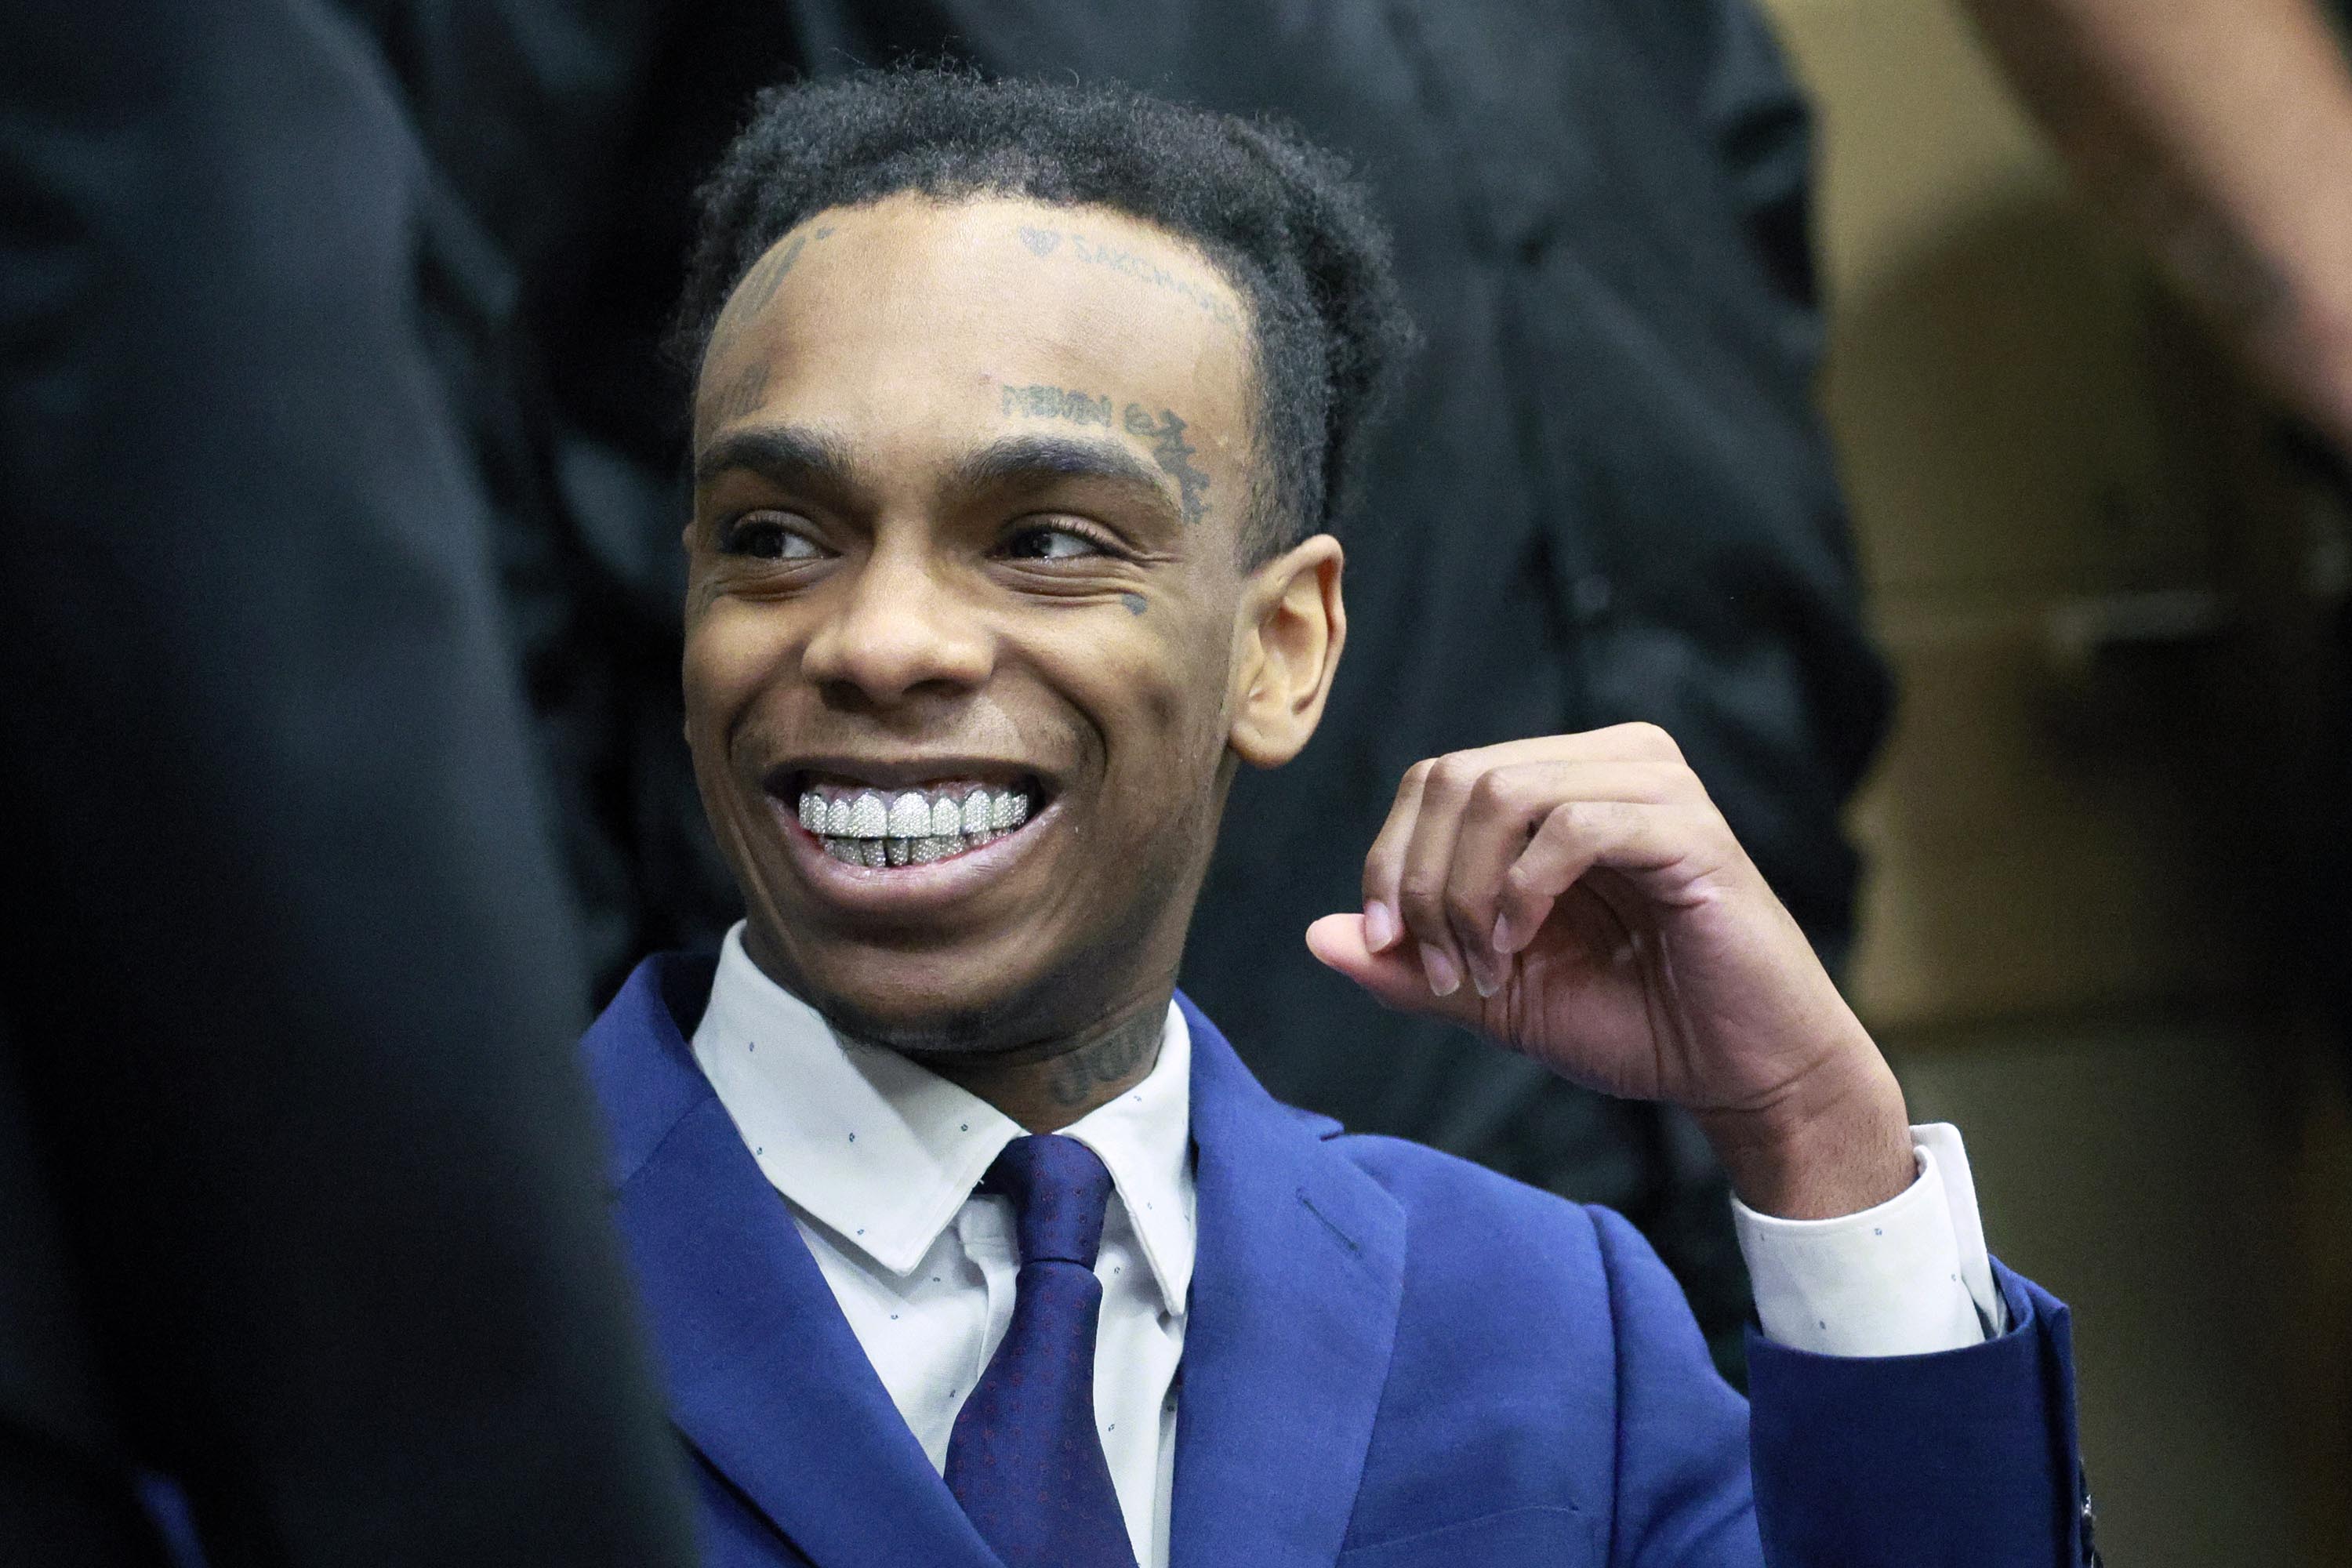 Jamell Demons, better known as rapper YNW Melly, reacts after the judge declared a mistrial after the jury was deadlocked and unable to reach a verdict at the Broward County Courthouse on Saturday, July 22, 2023, in Fort Lauderdale, Florida. | Source: Getty Images